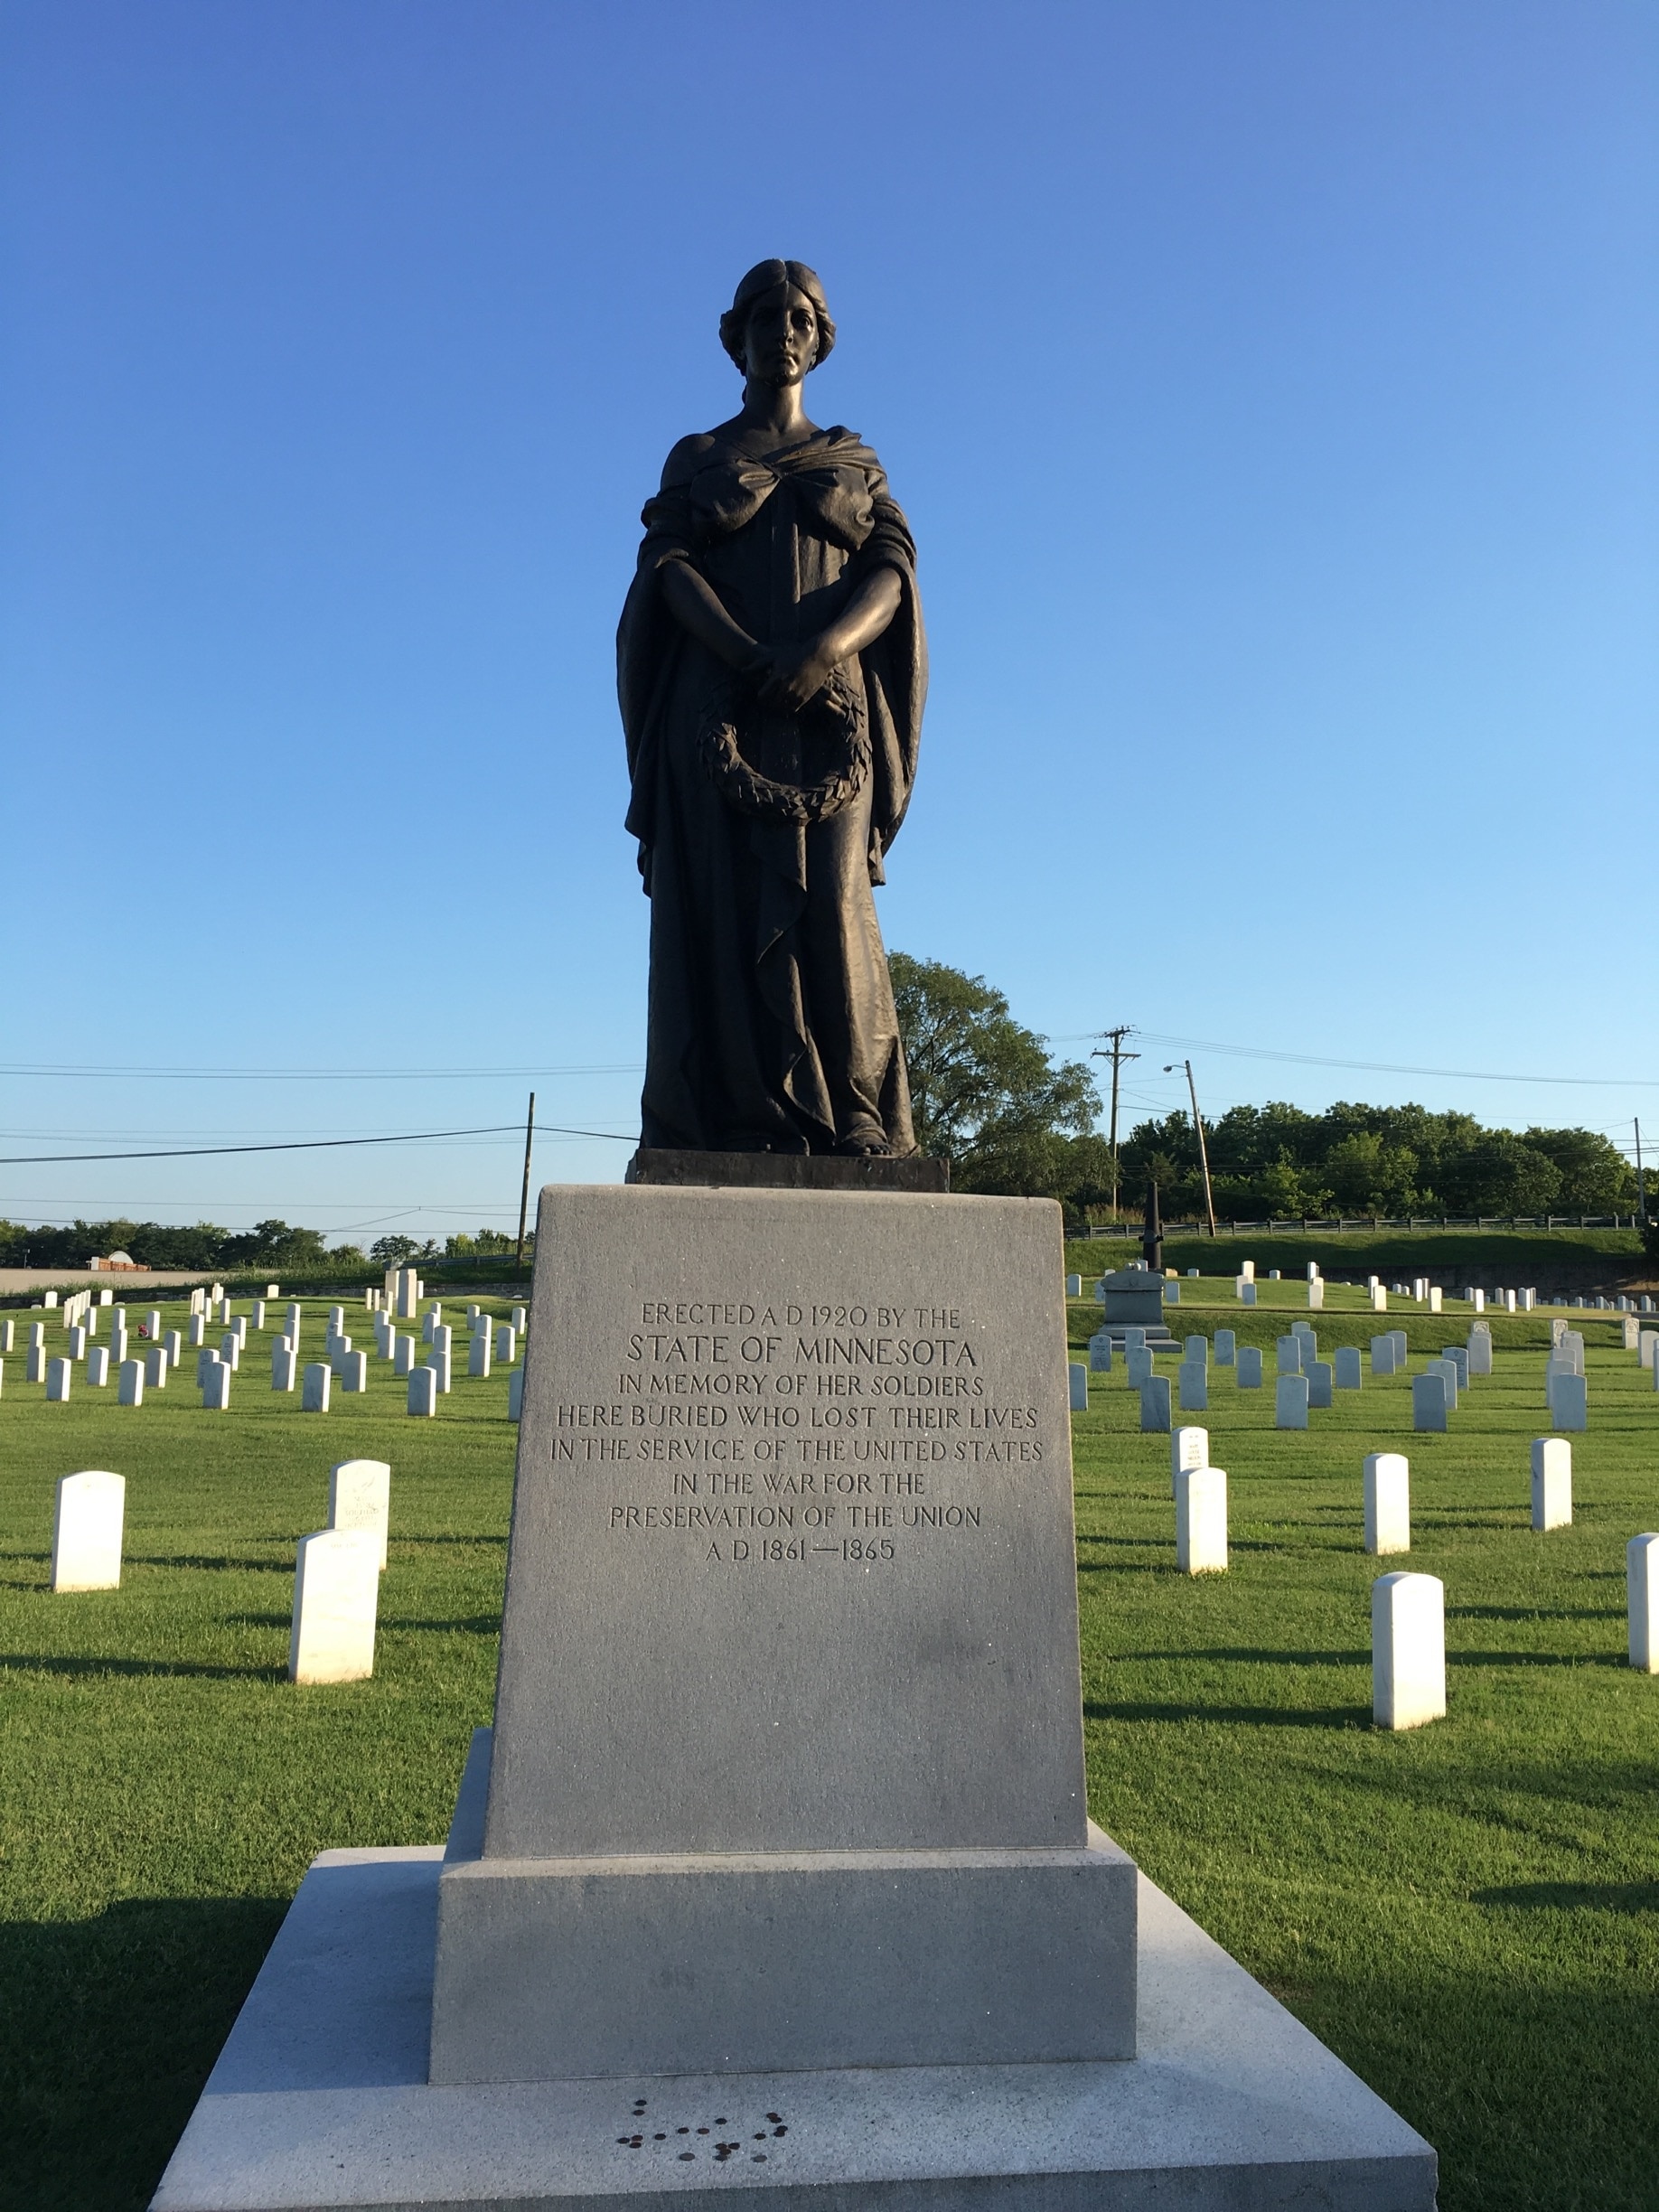 Wonderful National Cemetery in Nashville that was dedicated in 1867. 